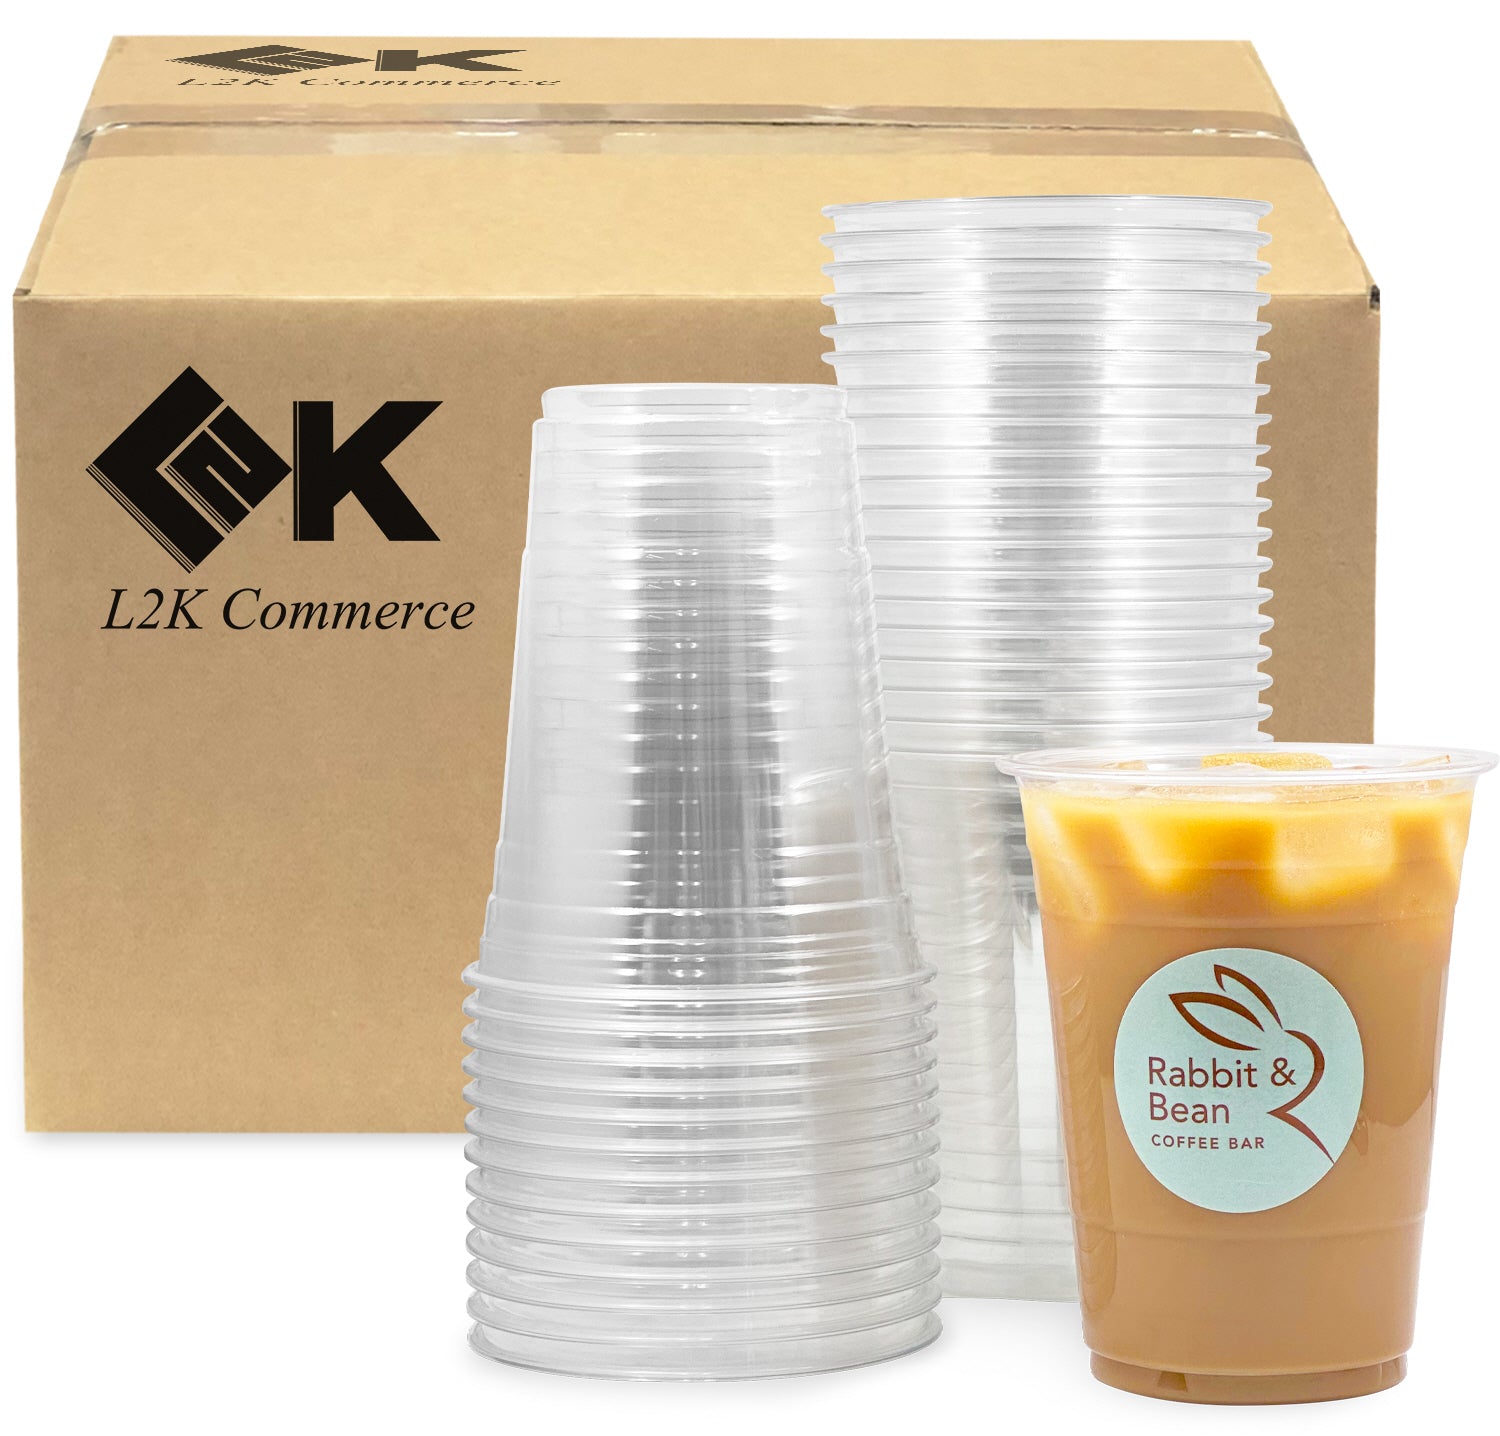 100 Pack 16 oz Clear Plastic Cups with Lids Reusable Coffee Cups Fruit Cups  Injection Cup and Sip Li…See more 100 Pack 16 oz Clear Plastic Cups with